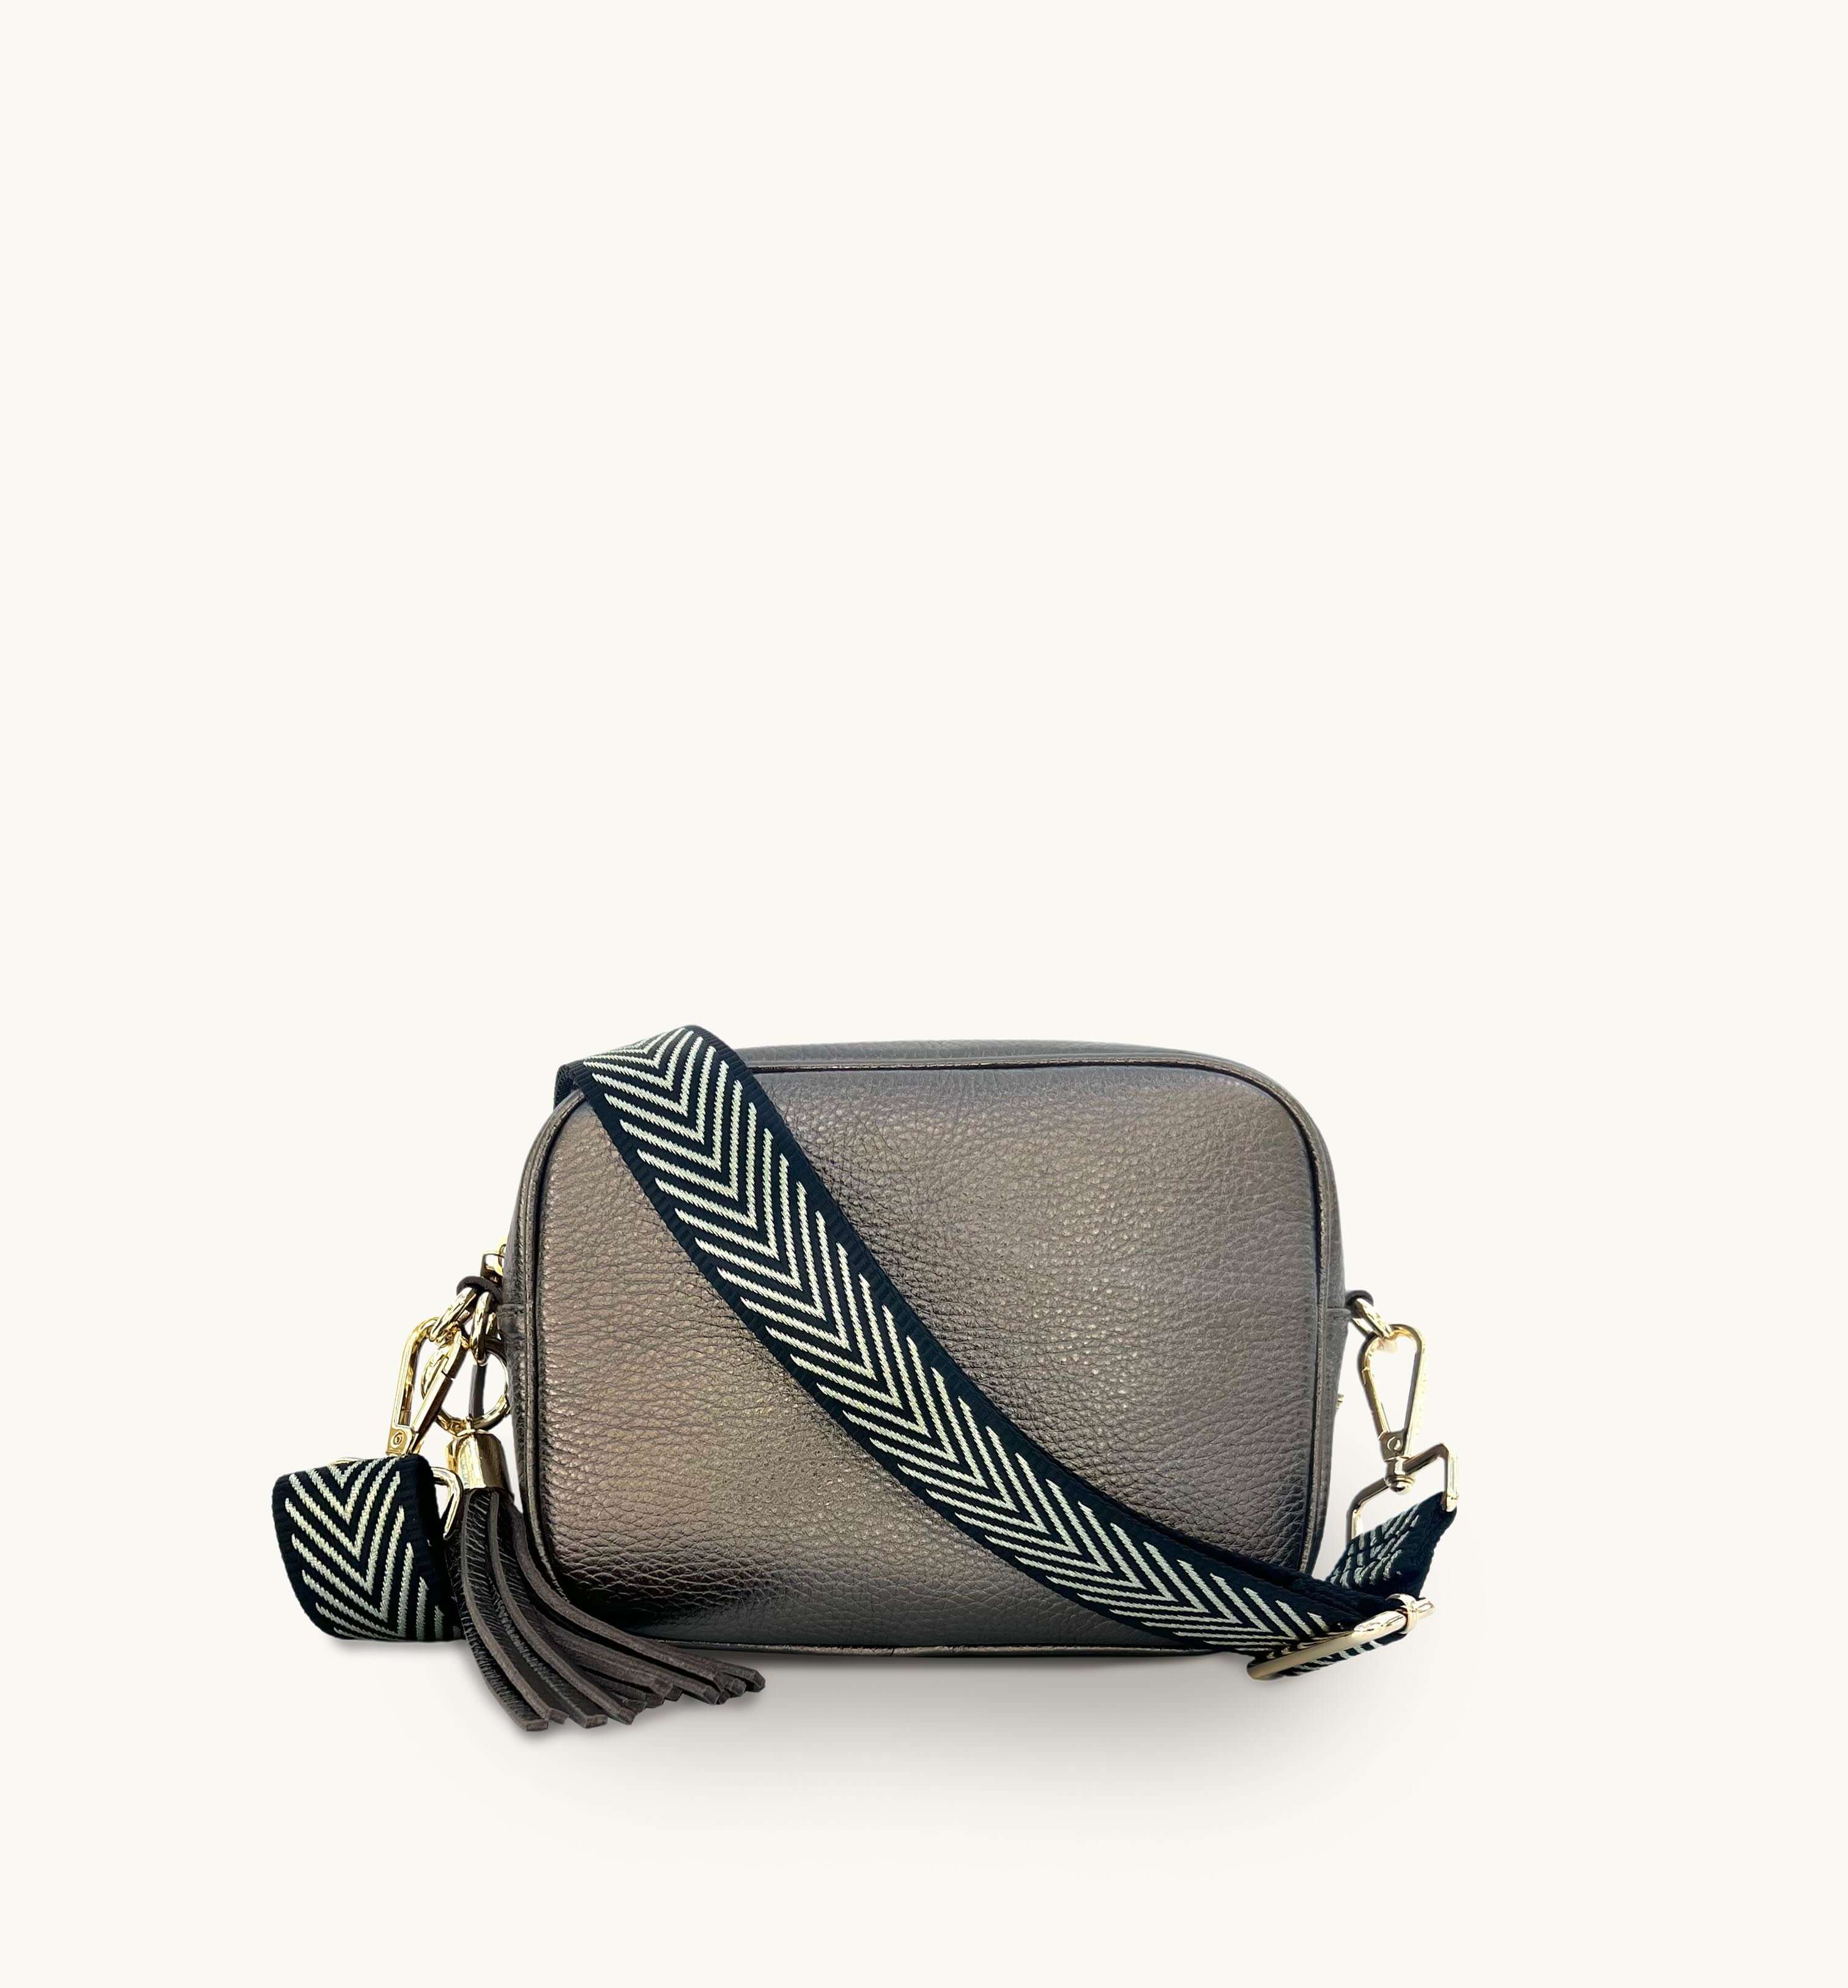 Apatchy Bronze Leather Crossbody Bag With Black & Gold Chevron Strap